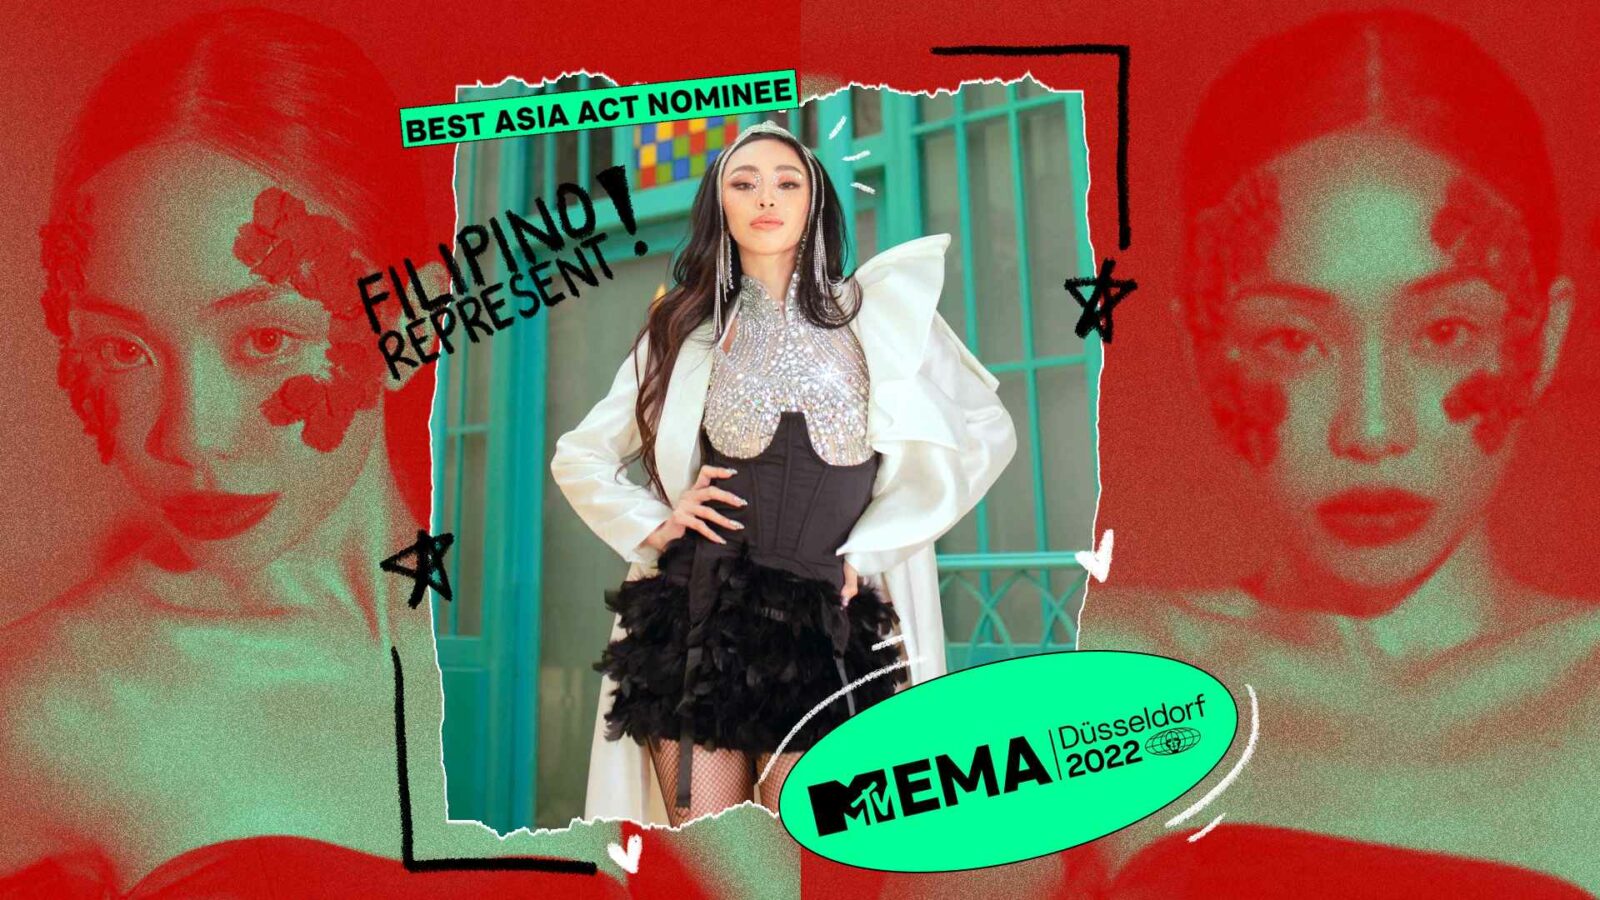 Maymay Entrata’s Global Recognition Continues With Her MTV EMA Nomination